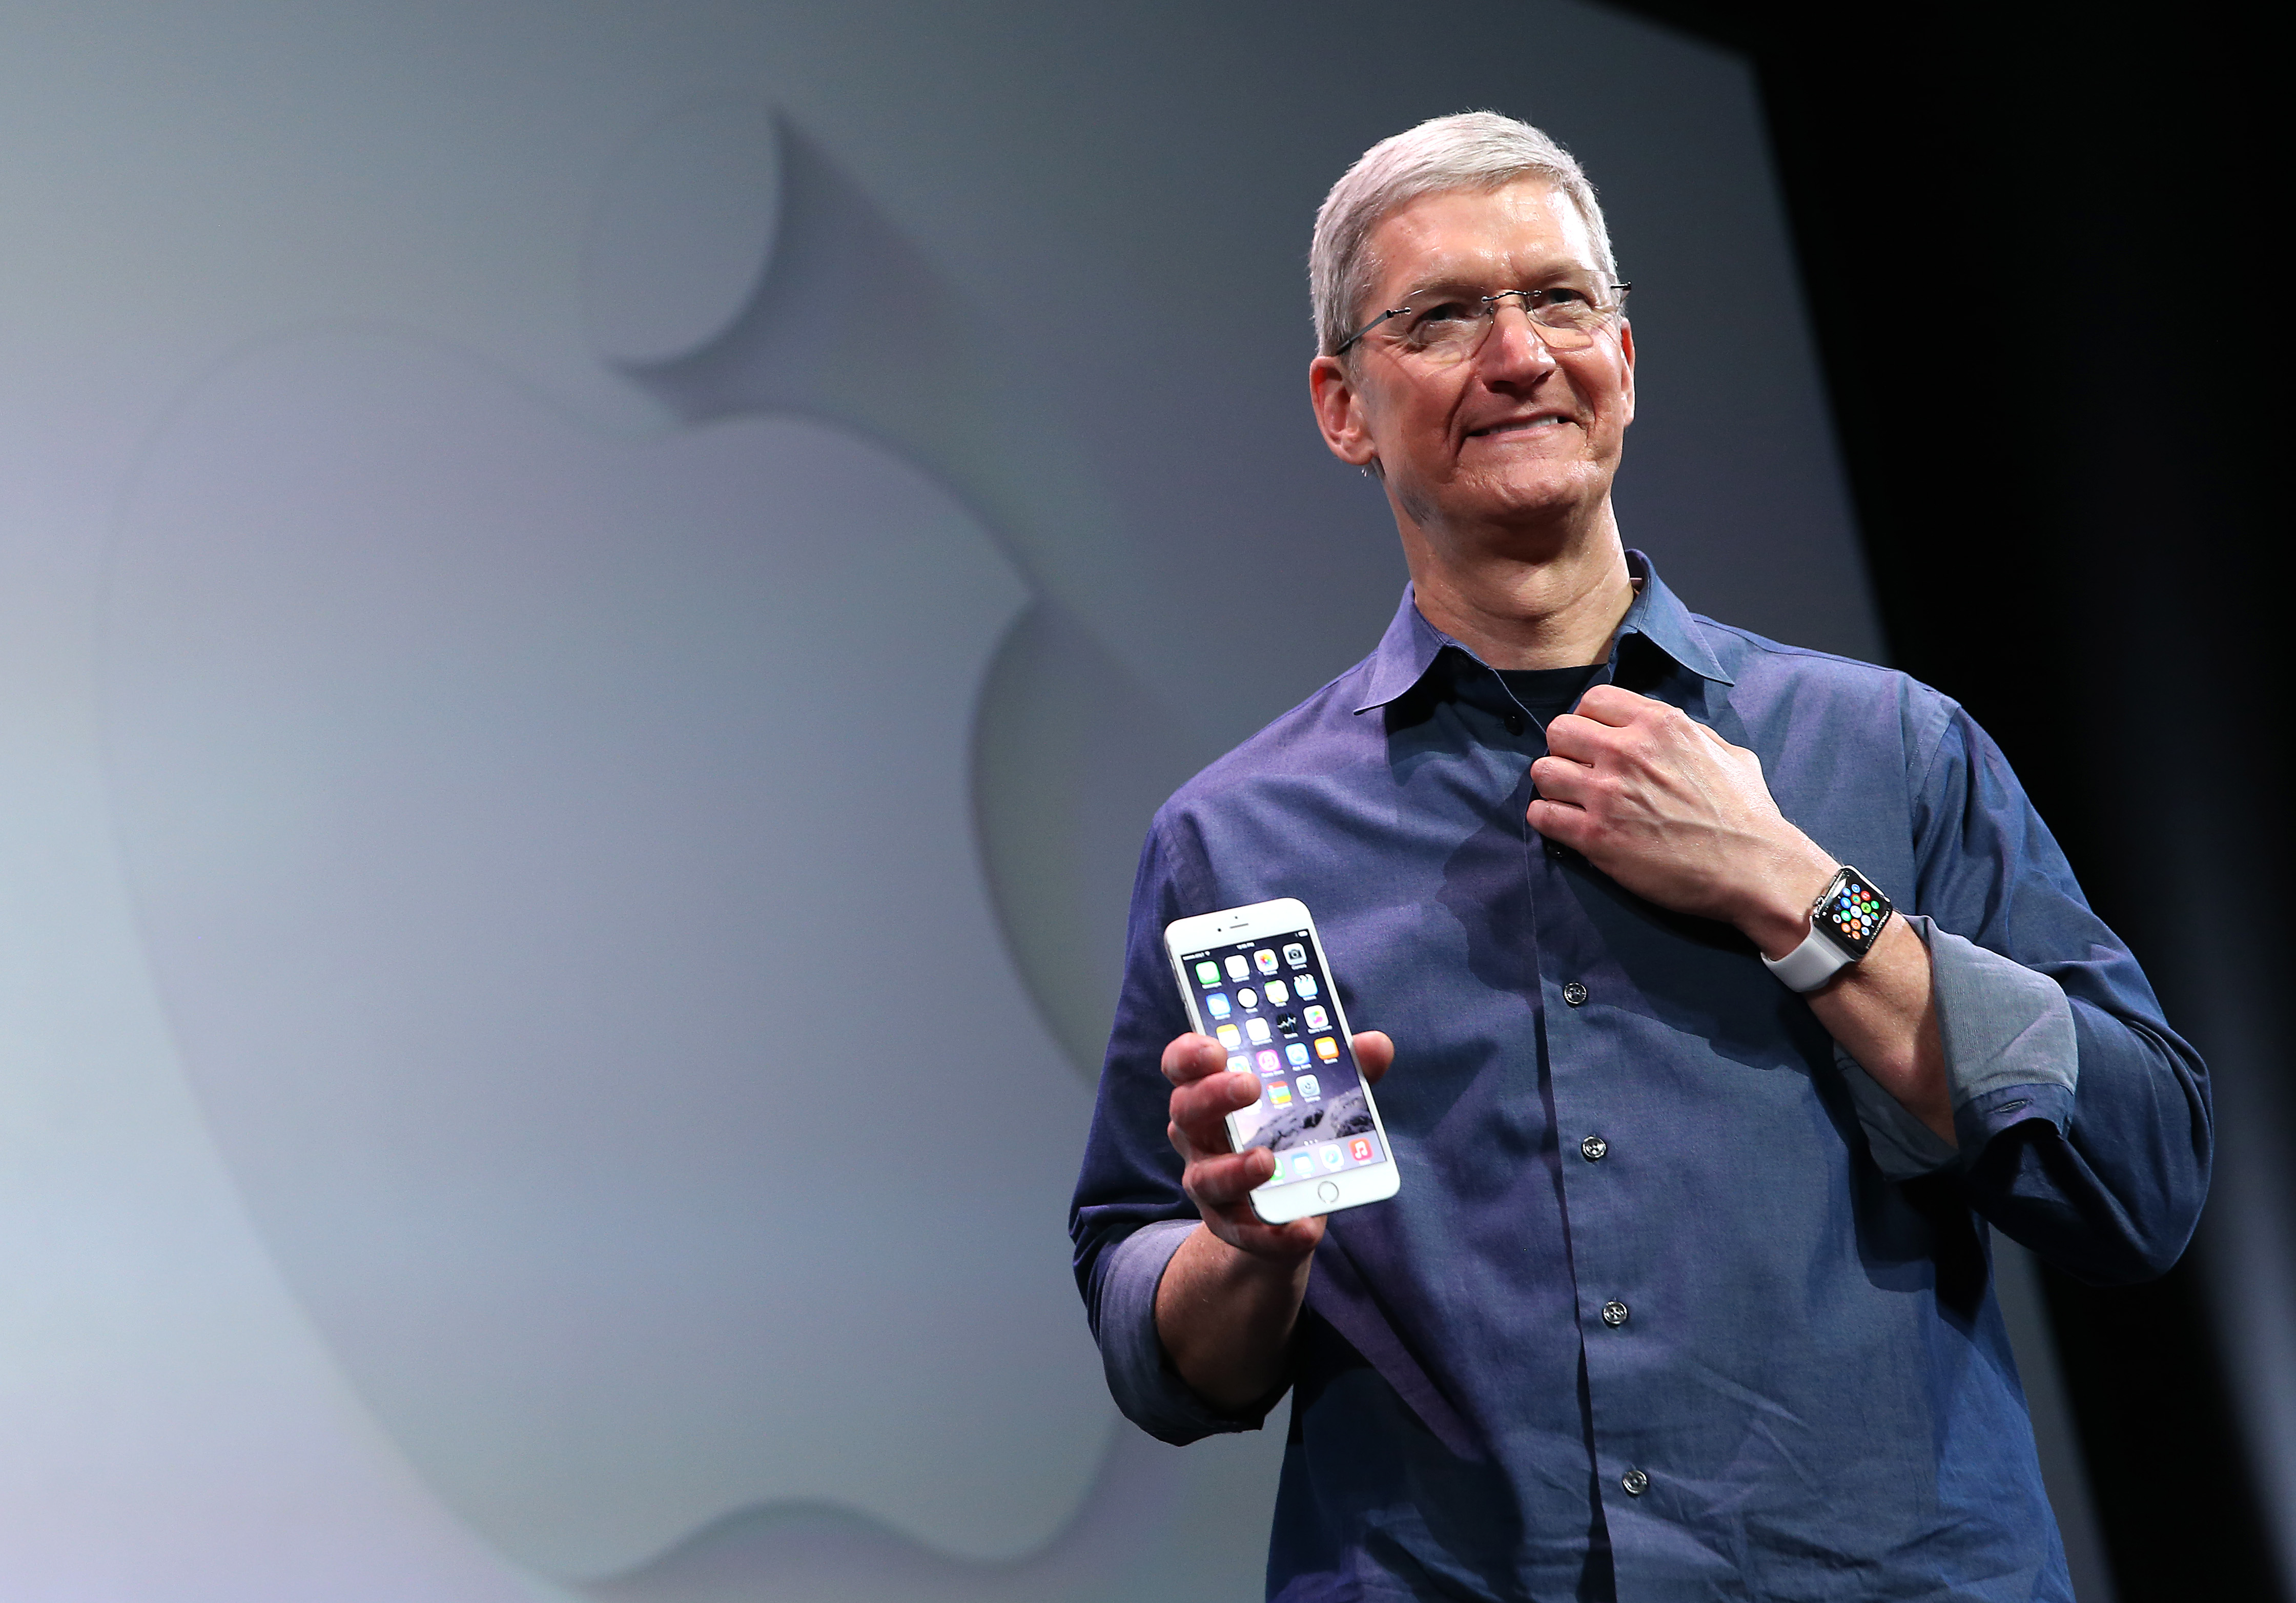 Apple CEO Tim Cook shows off the new iPhone 6 and the Apple Watch during an Apple special event at the Flint Center for the Performing Arts on September 9, 2014 in Cupertino, California. Apple is expected to unveil the new iPhone 6 and wearble tech. (Photograph by Justin Sullivan—Getty)